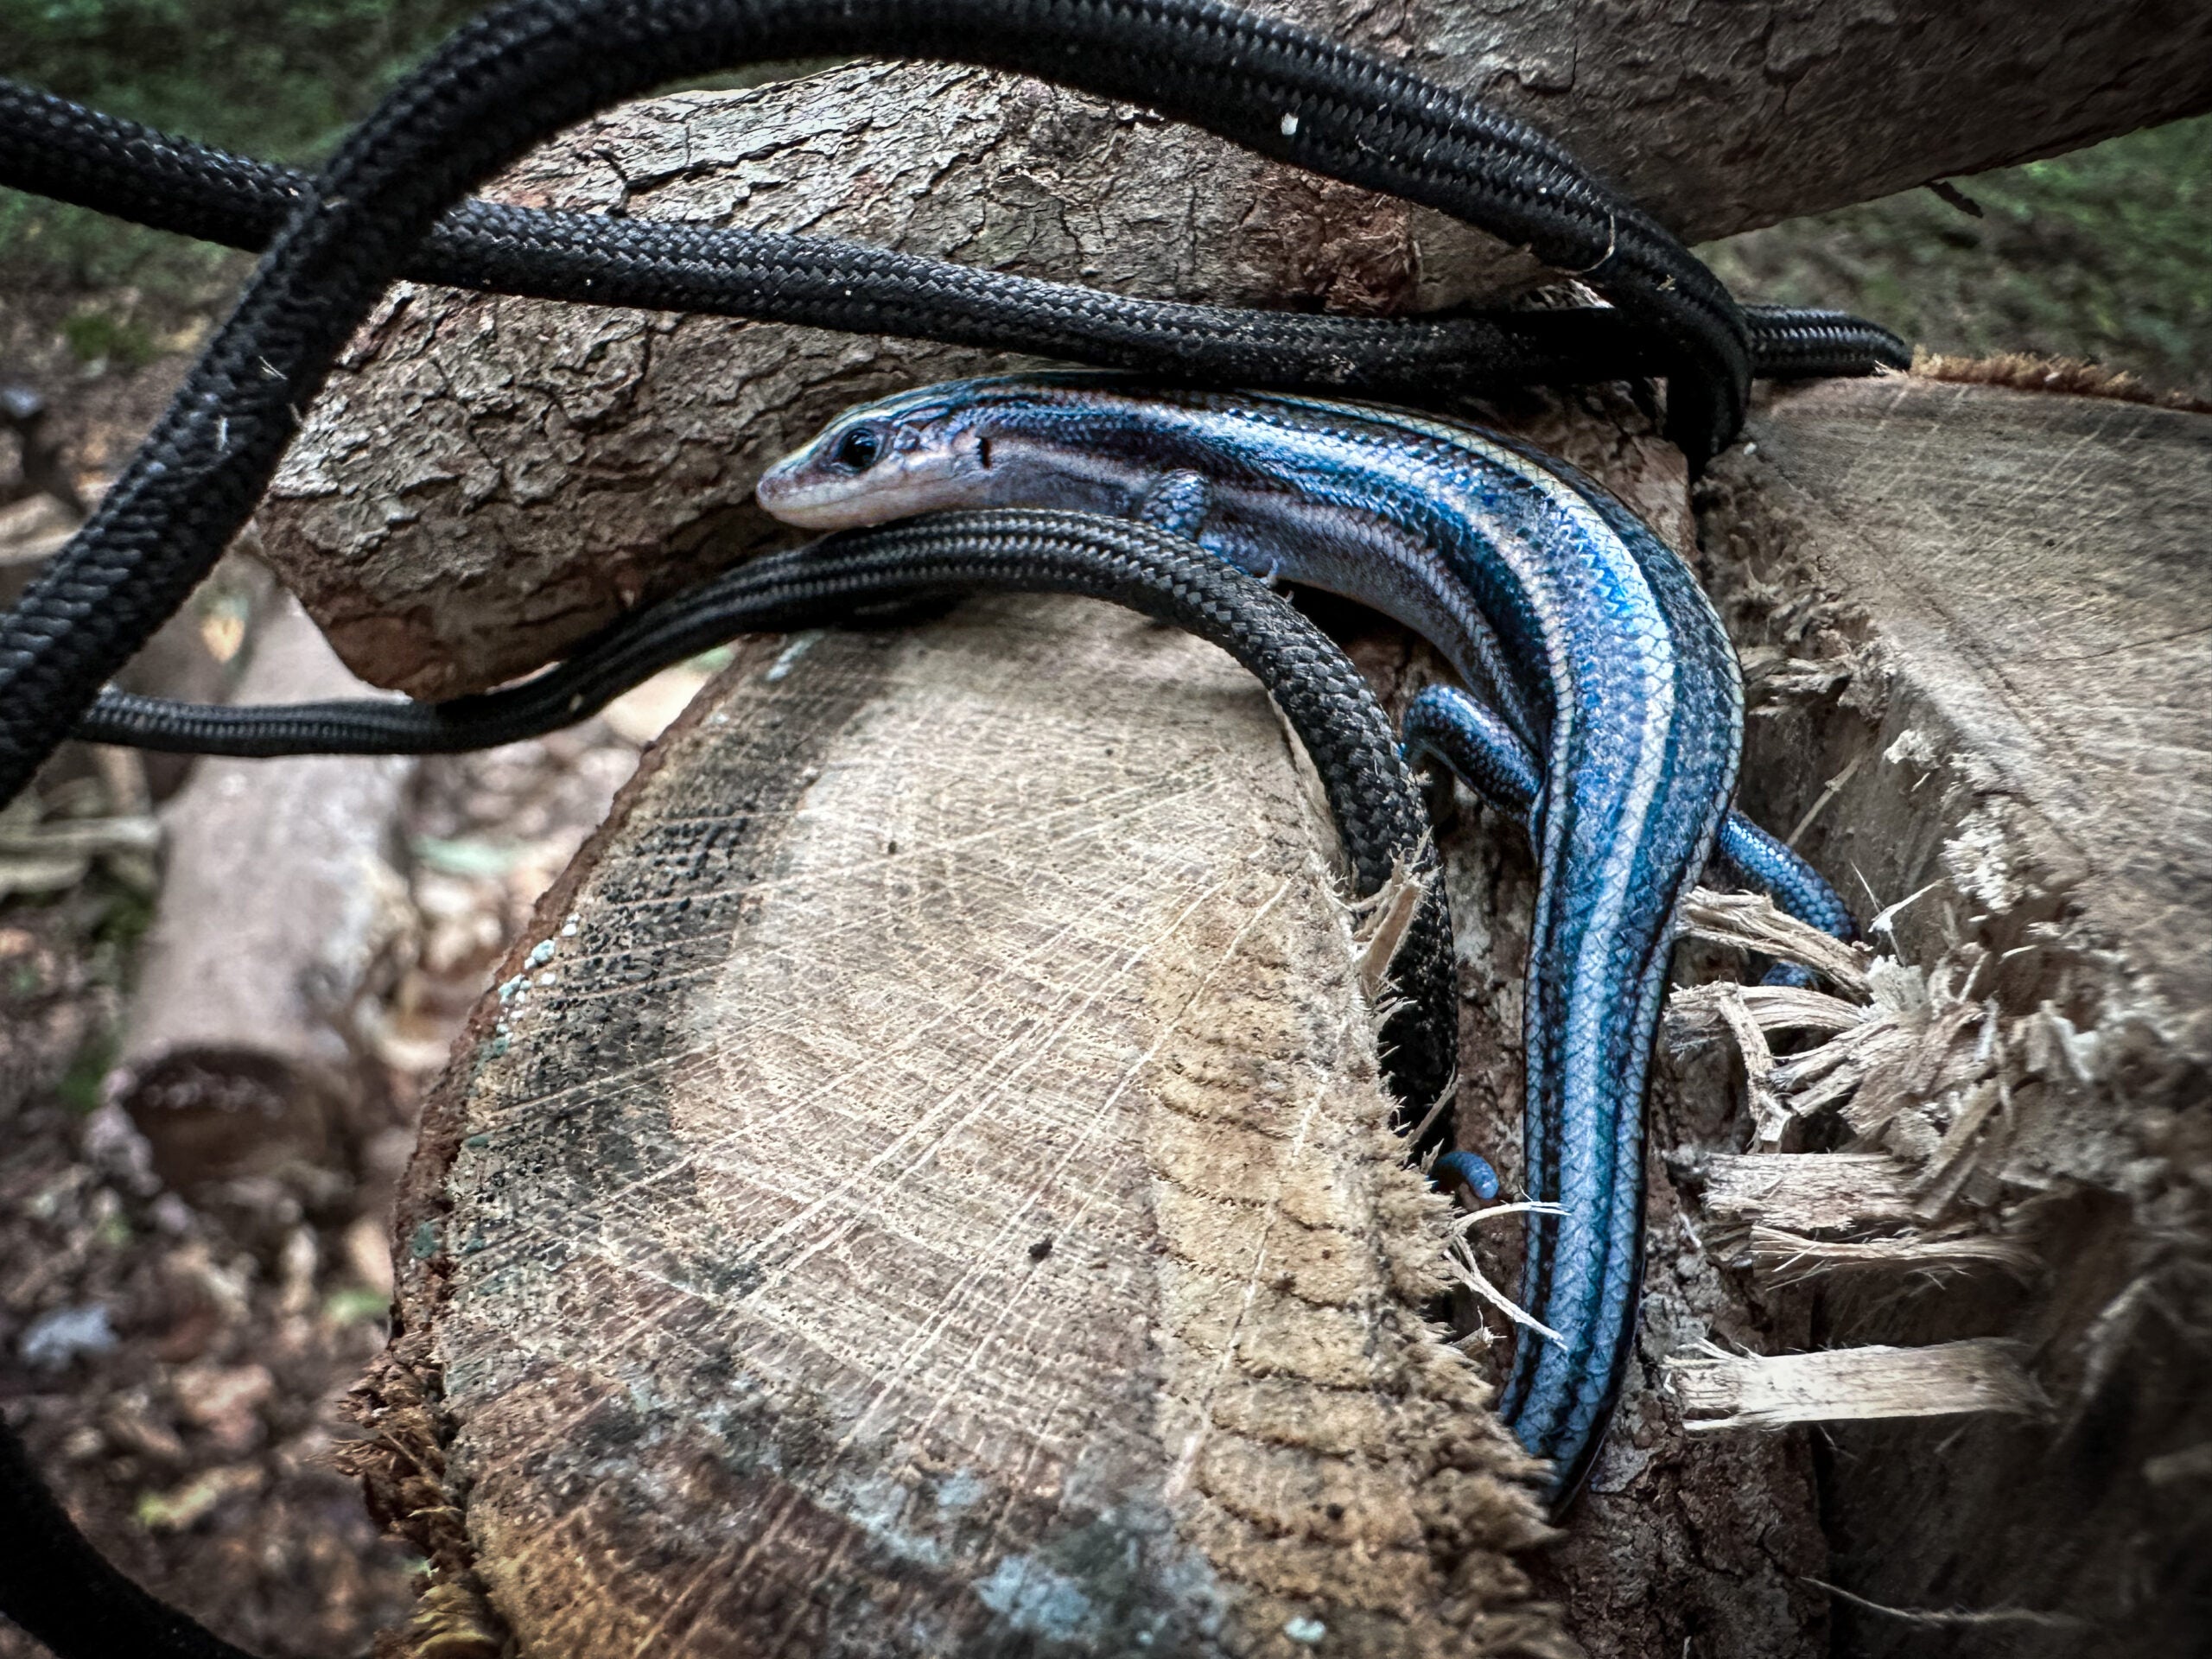 A small snake coiled between rocks and a log in the woods.